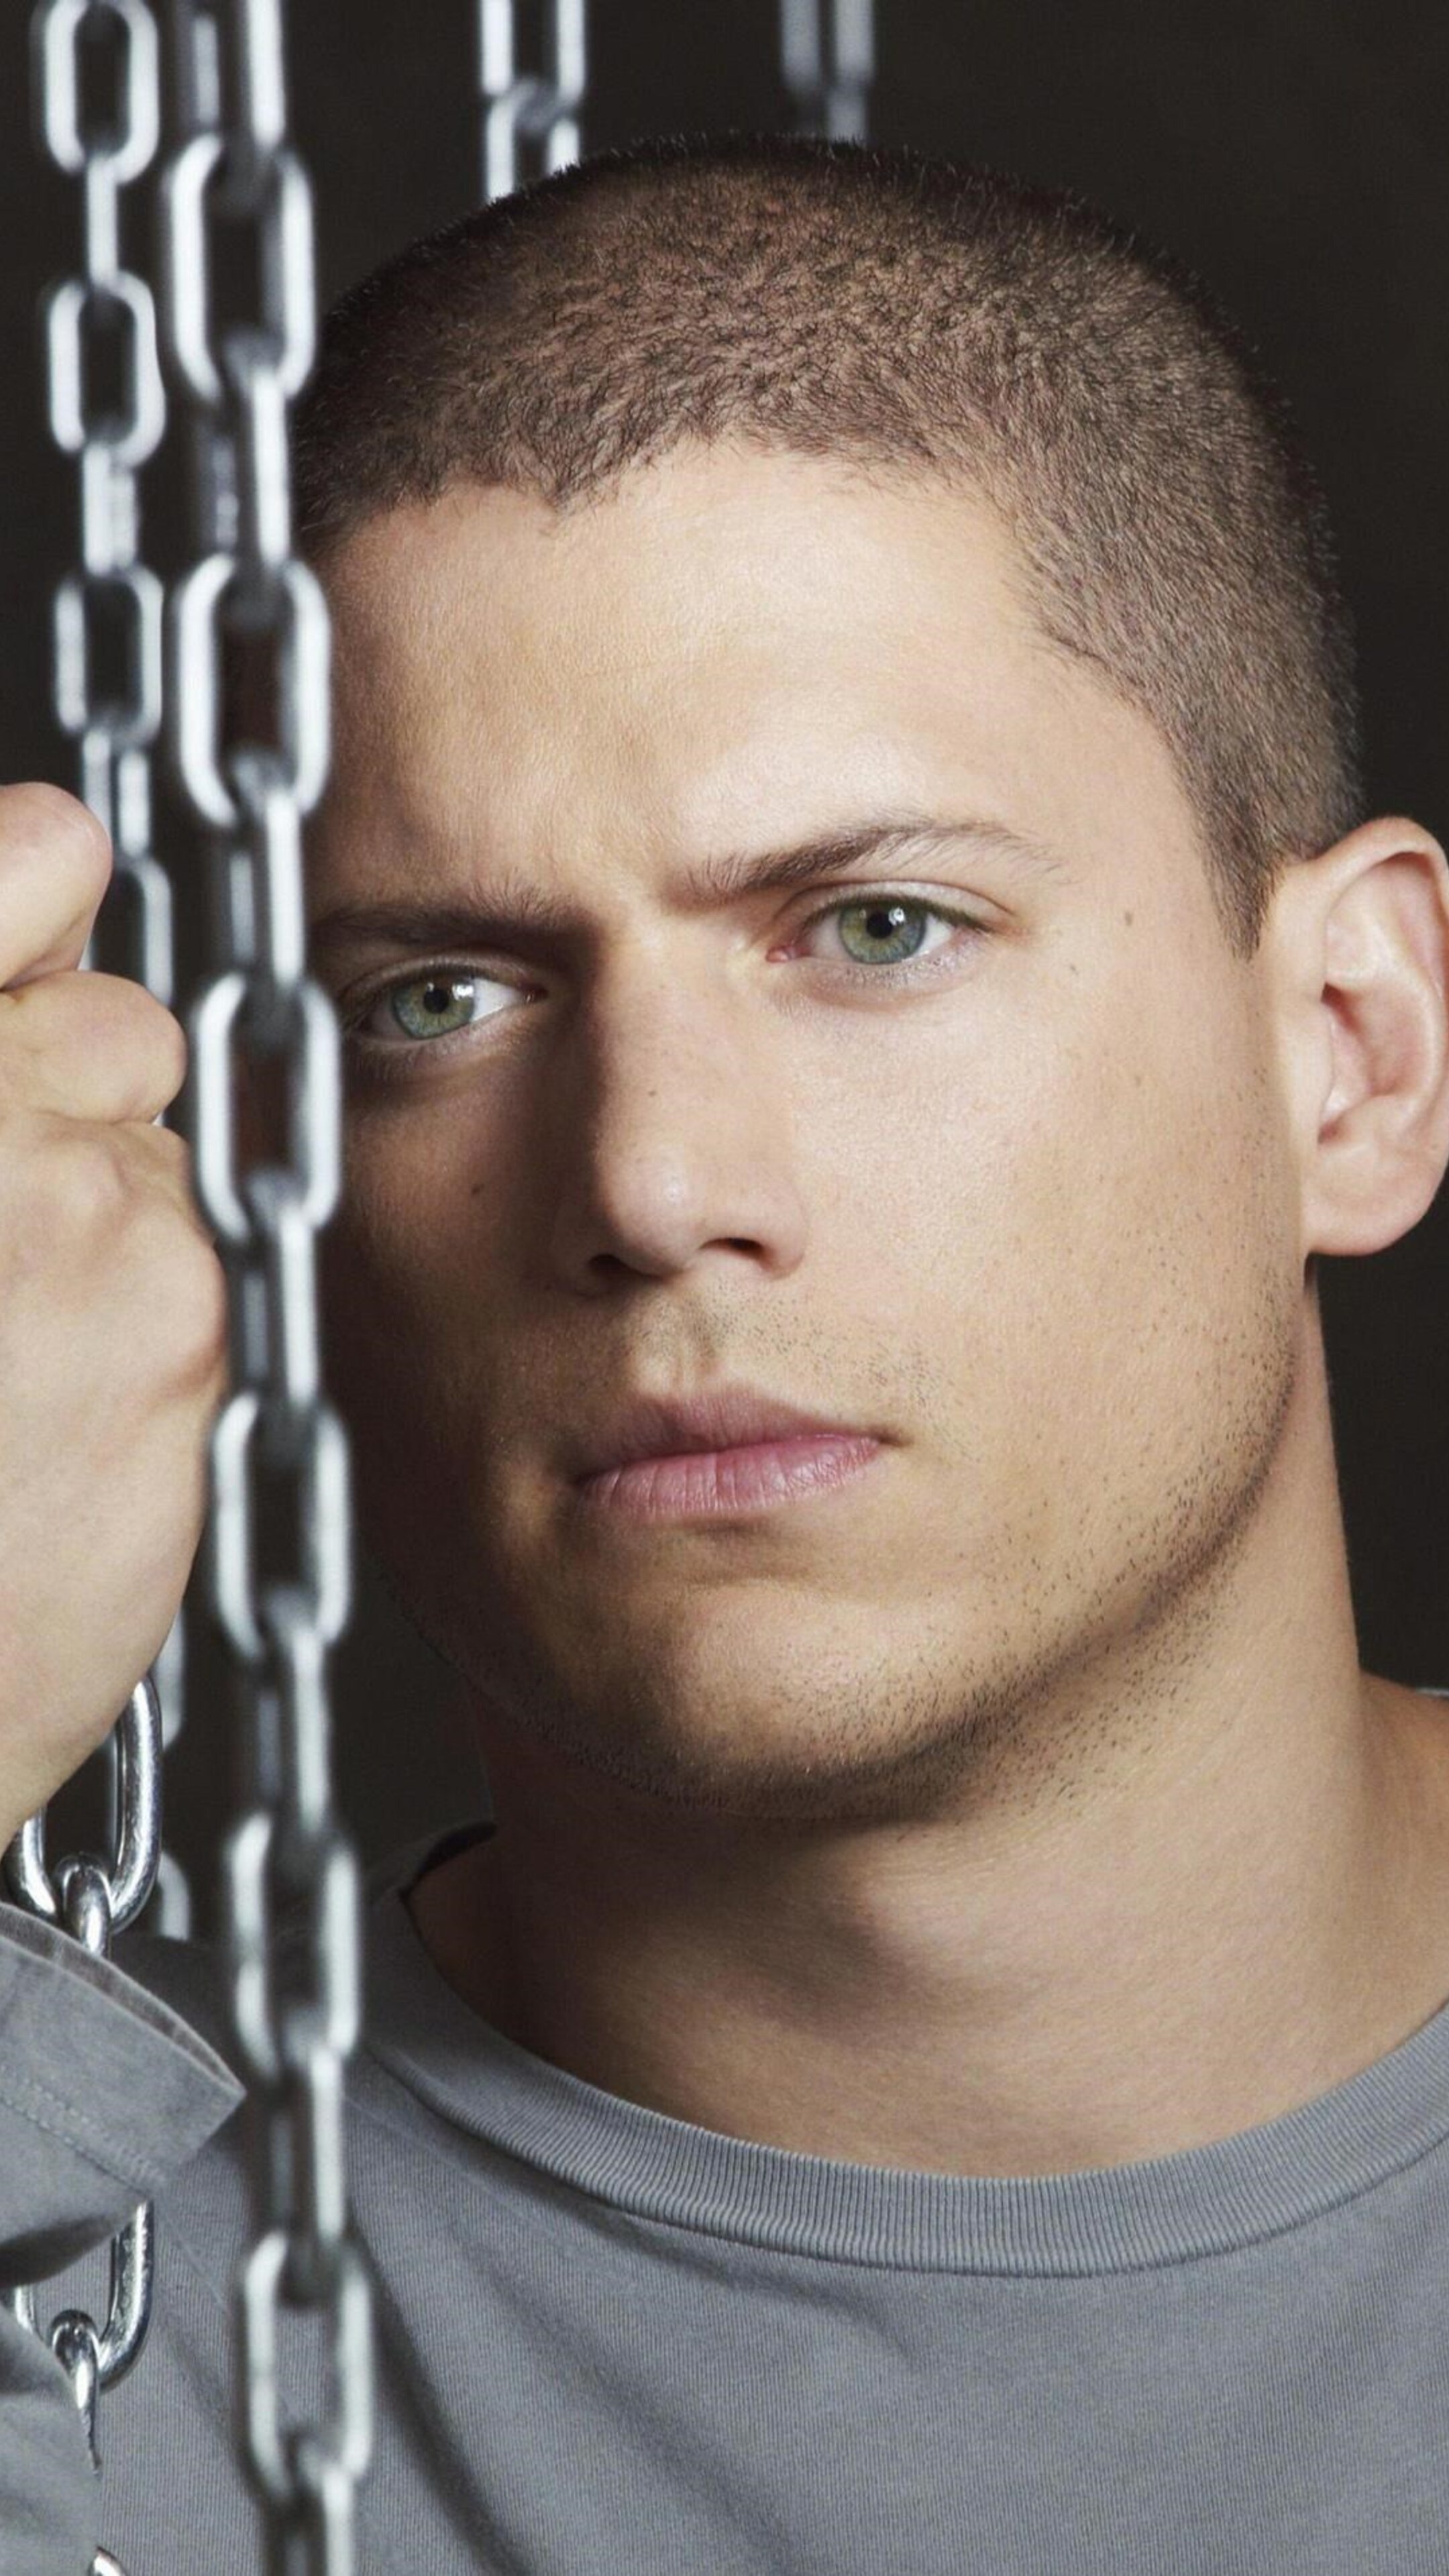 Prison Break TV Series, Wentworth Miller, Sony Xperia, High-resolution wallpapers, 2160x3840 4K Phone